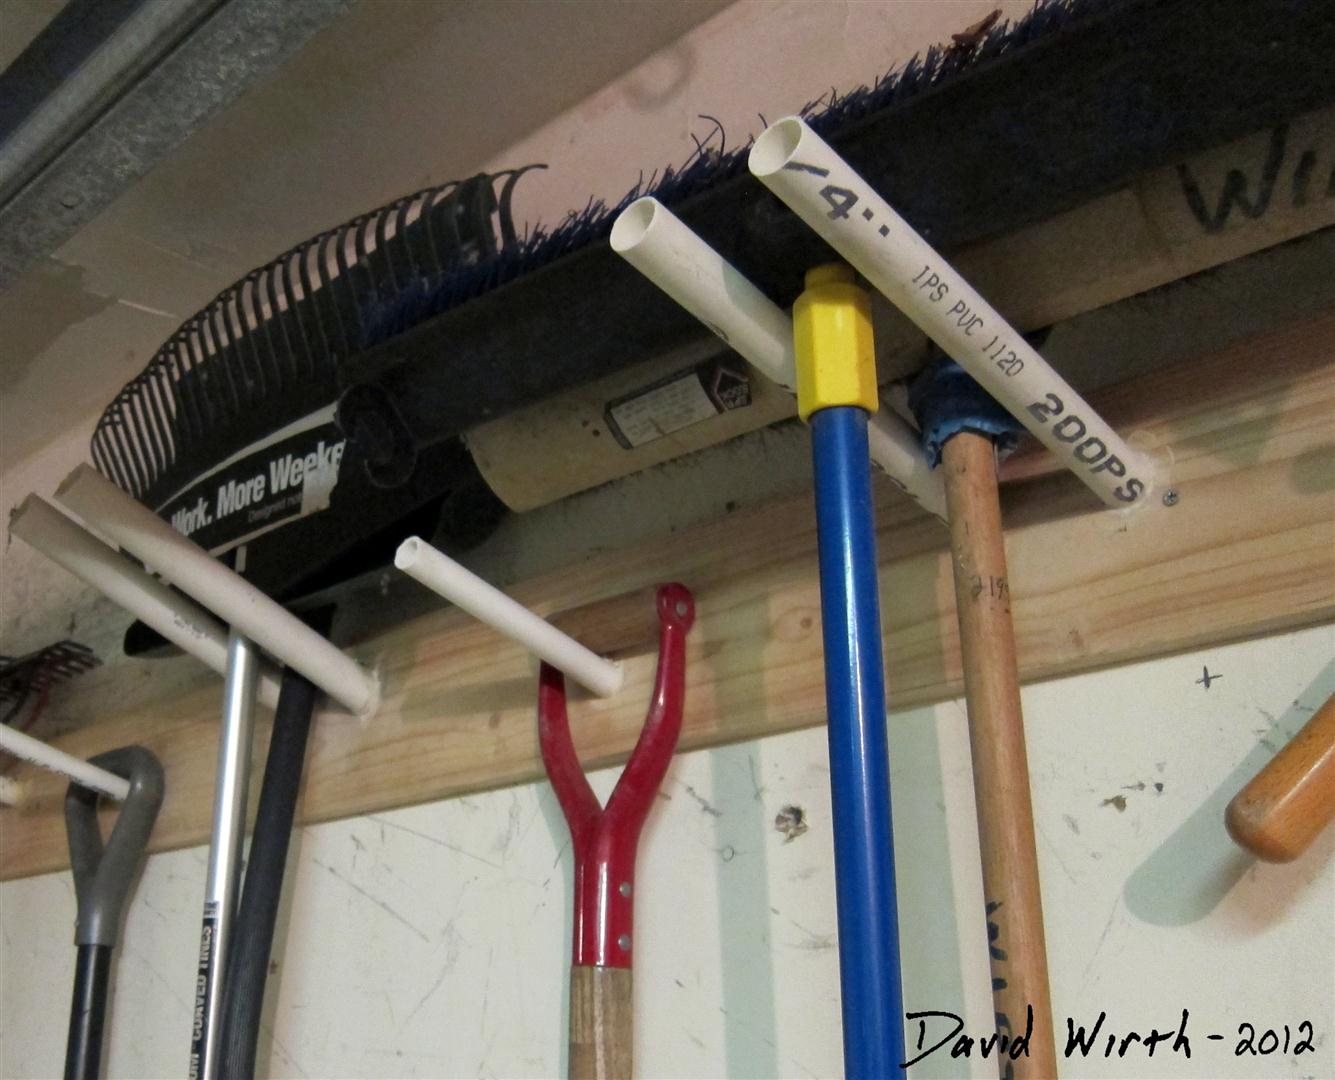  pvc tool rack in garage, attach to wall, how to build, simple plans